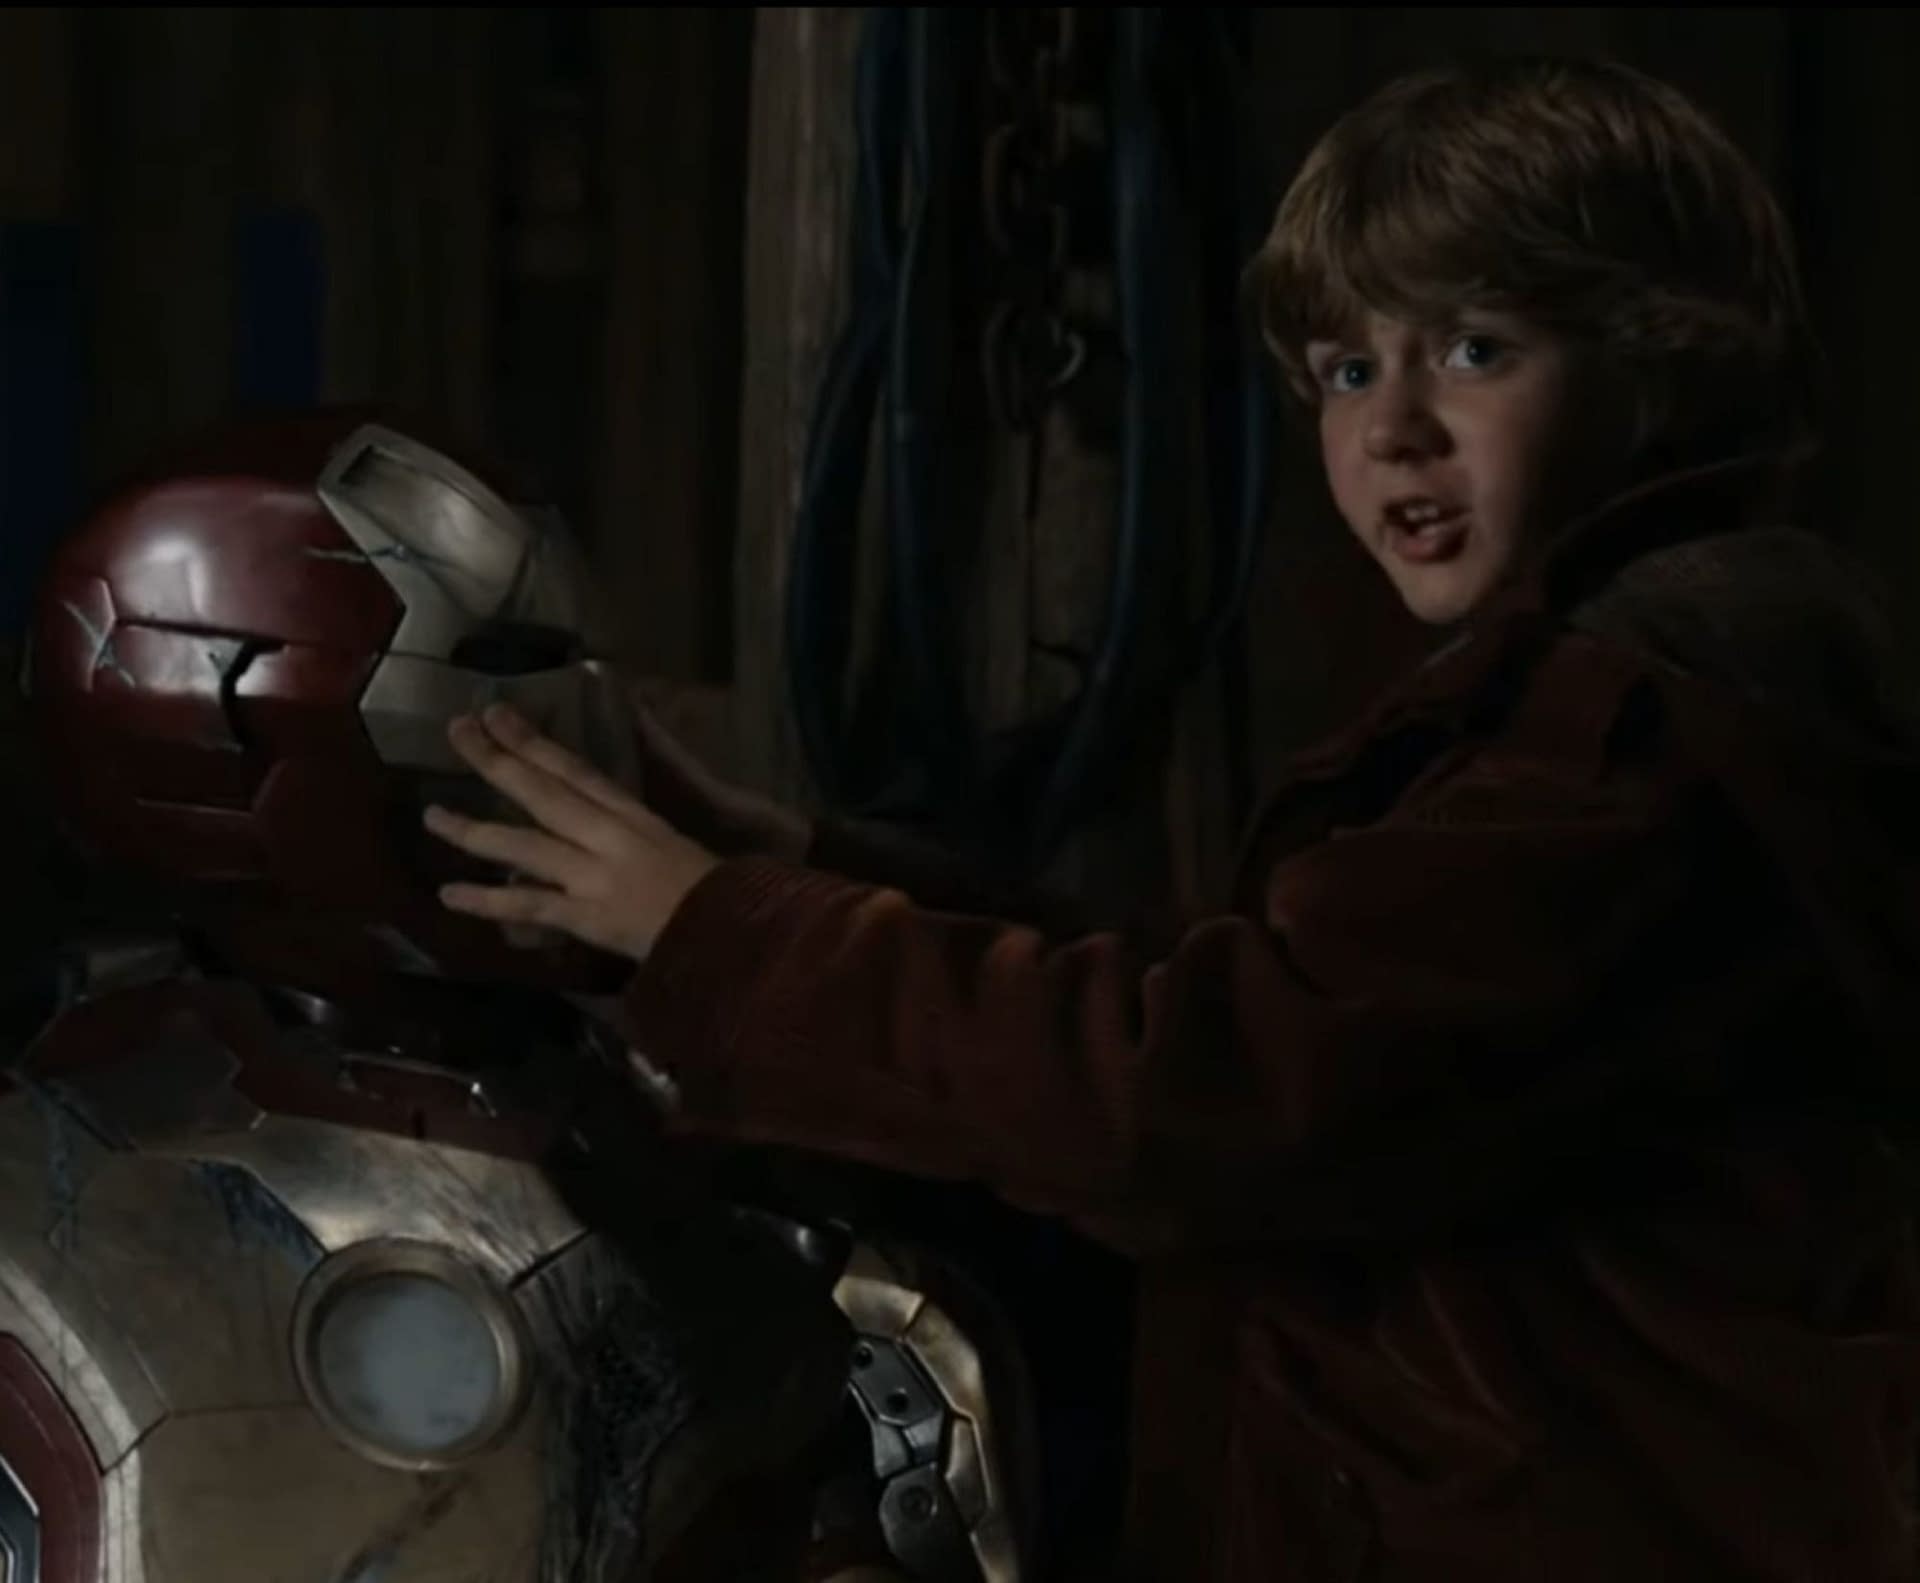 The Iron Man 20 Kid Could Have Been Chinese, To Flatter Xi Jinping